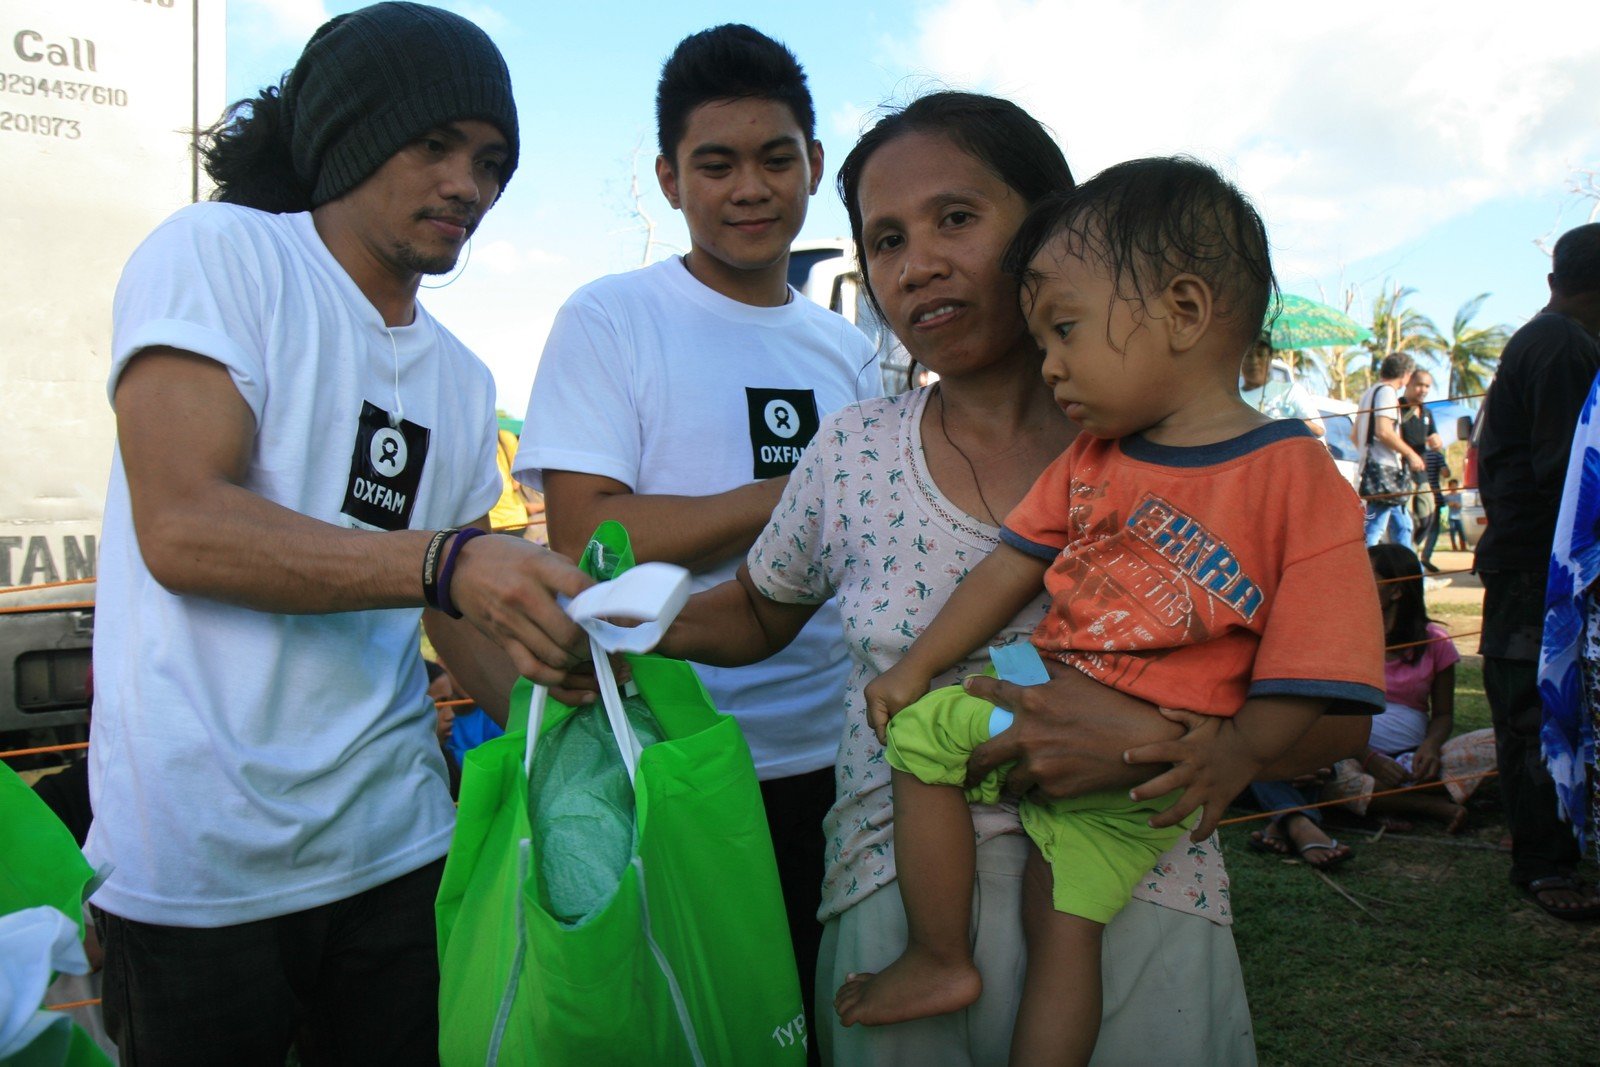 Dolor Moralde receives a hygiene kit from Oxfam. The hygiene kit contains soap, a blanket, clean underwear and toothbrushes.